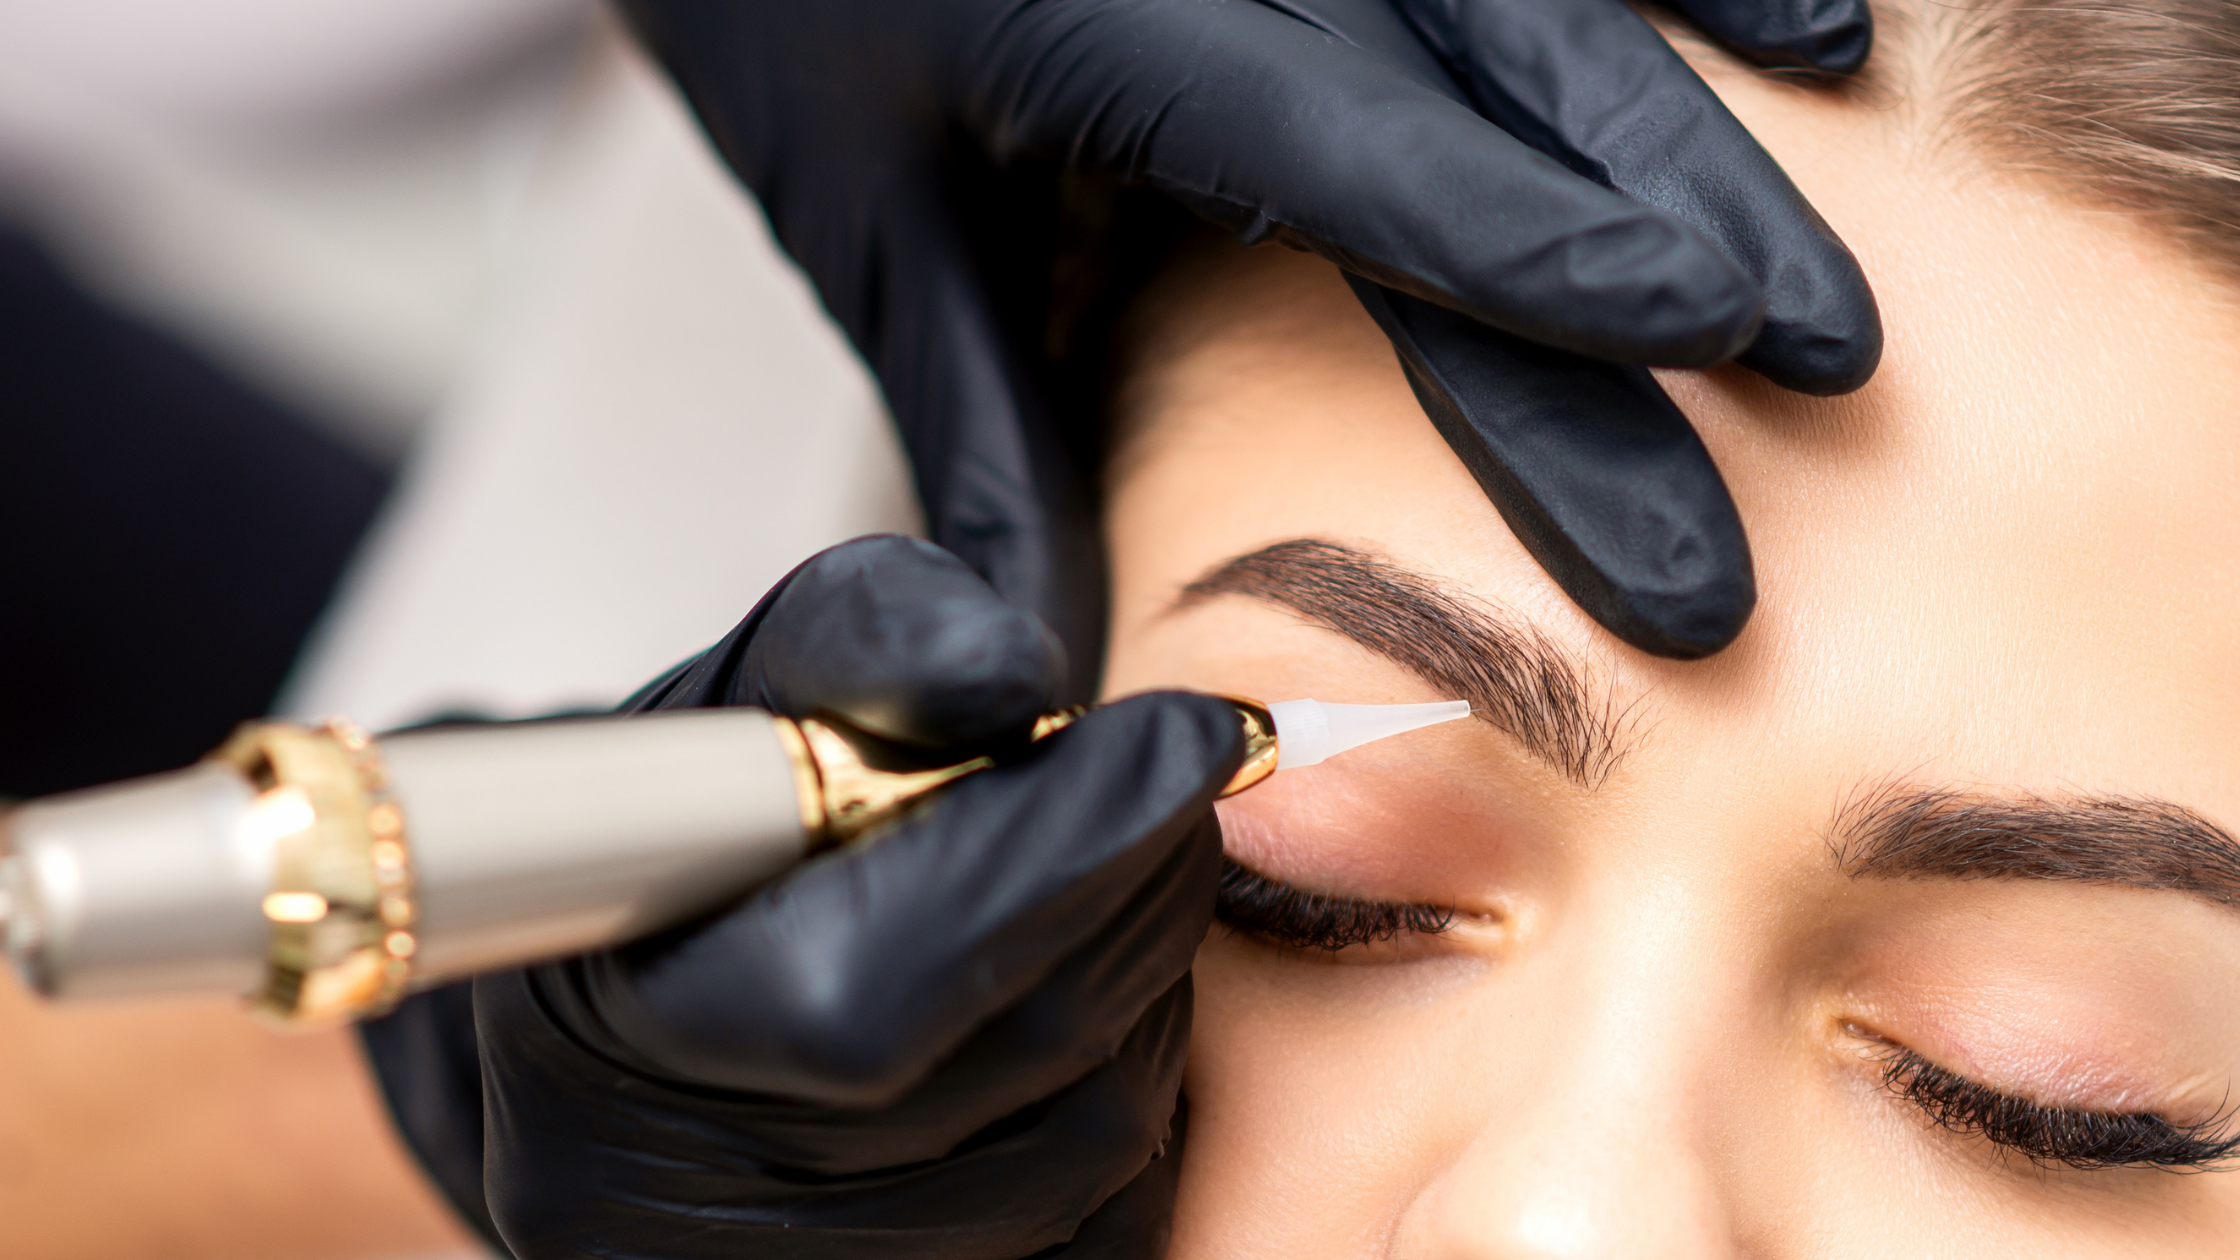 Microblading Skill Certification 2021: Why You Should Get It